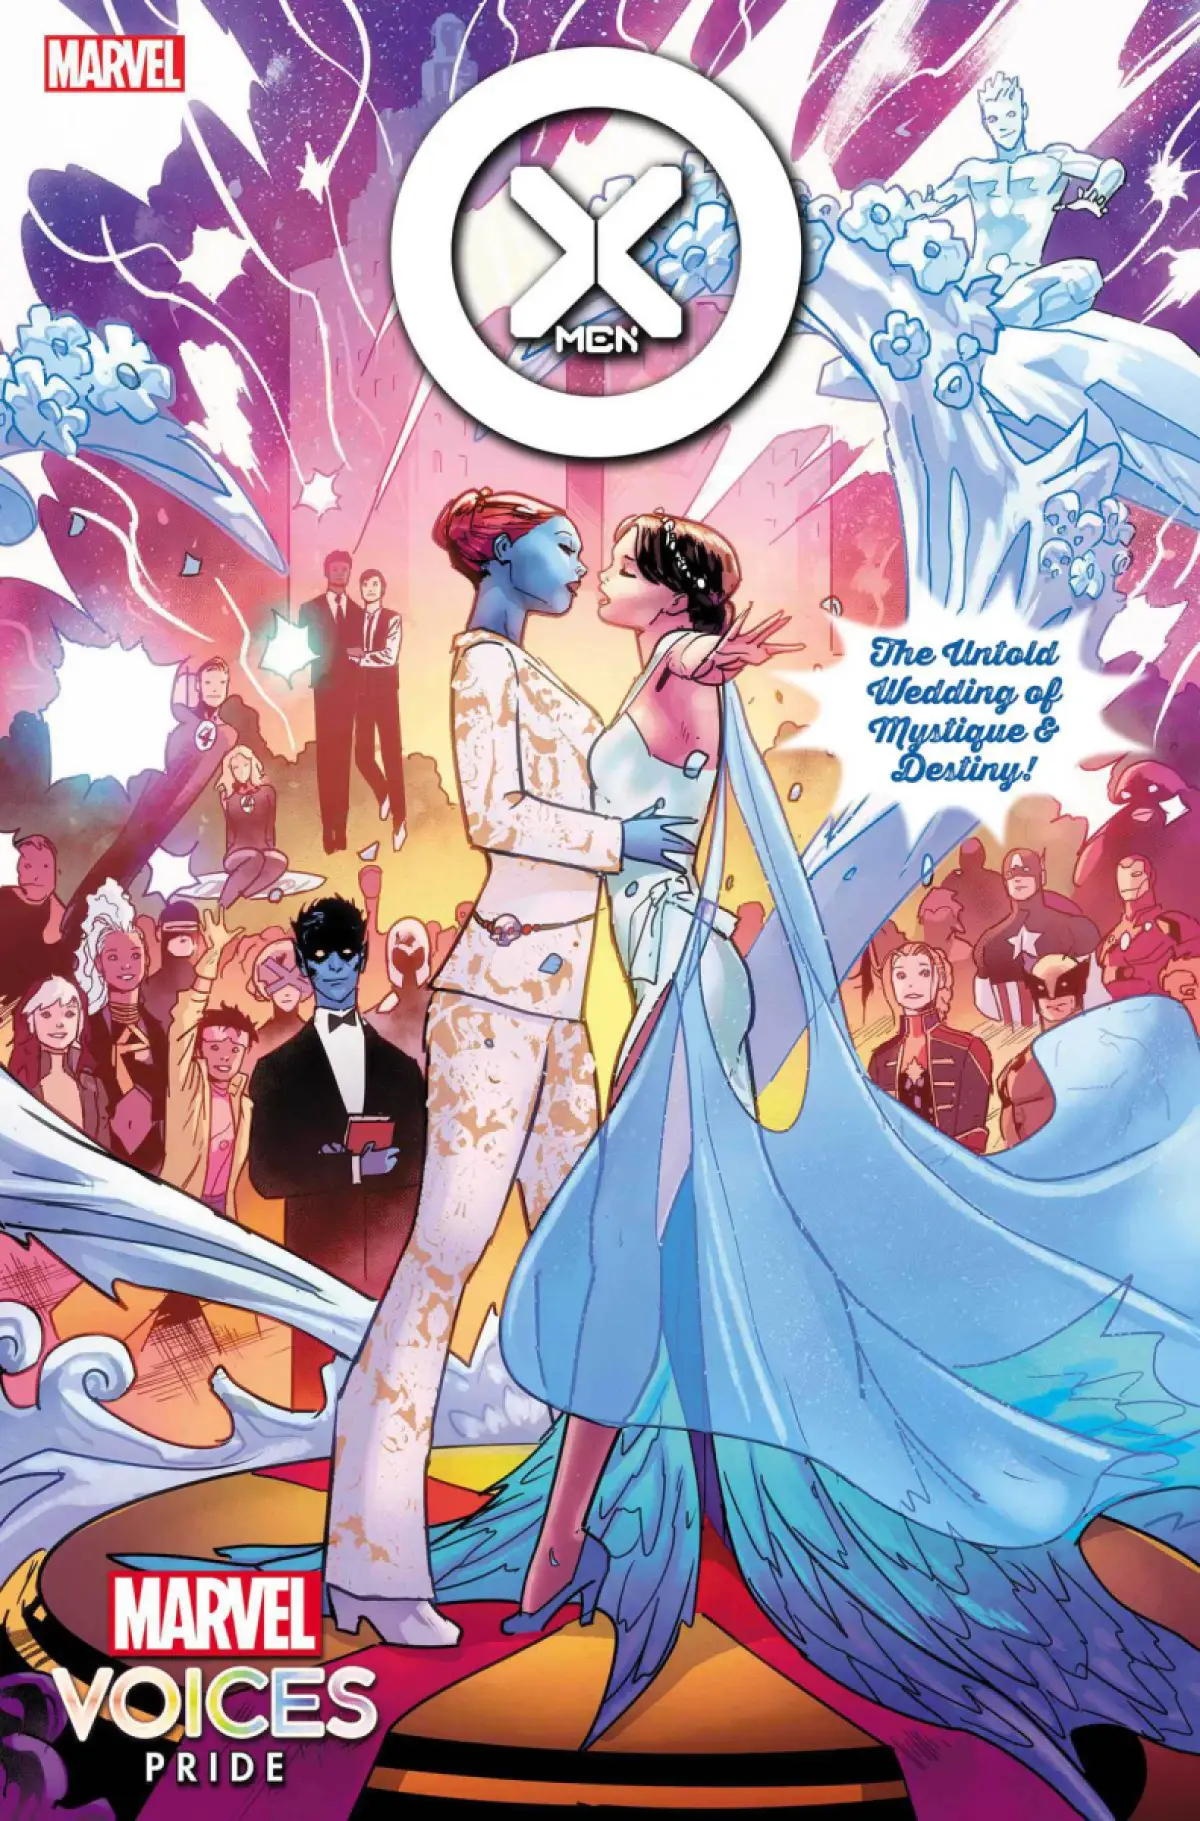 full cover of Cover art from Marvel Comics' 'X-Men: The Wedding Special' shows Mystique and Destiny getting married.